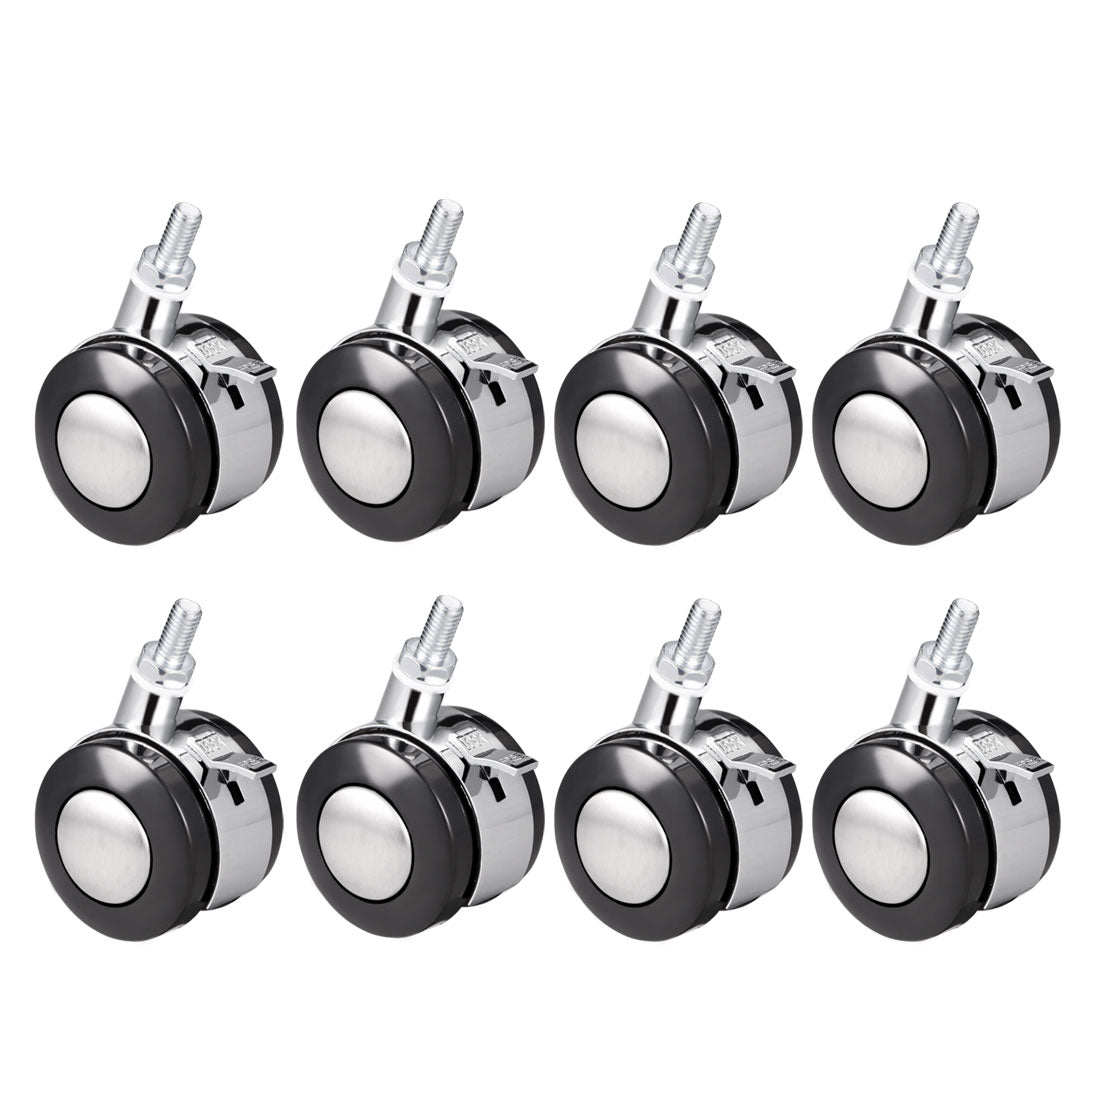 uxcell Uxcell Office Chair Casters Alloy Plastic 2 Inch Twin Wheel with Brake, M8 x 15mm Threaded Stem Swivel Caster, 44lb Load Capacity, 8 Pcs